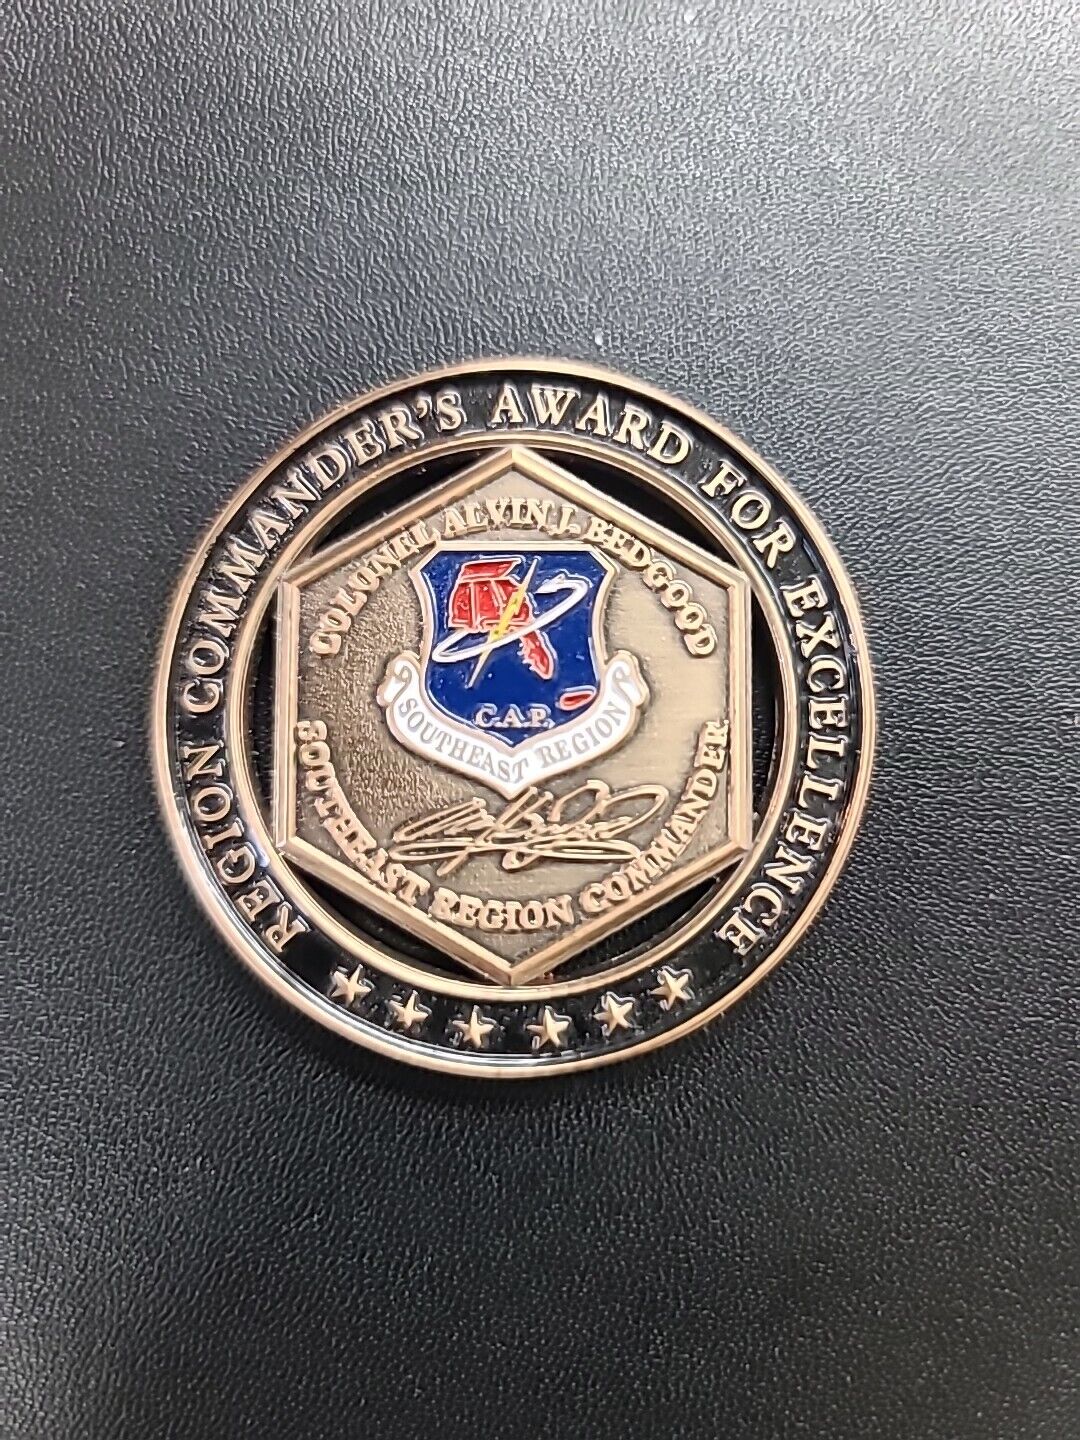 Civil Air Patrol Commanders Award For Excellence Challenge Coin Air Force Rare